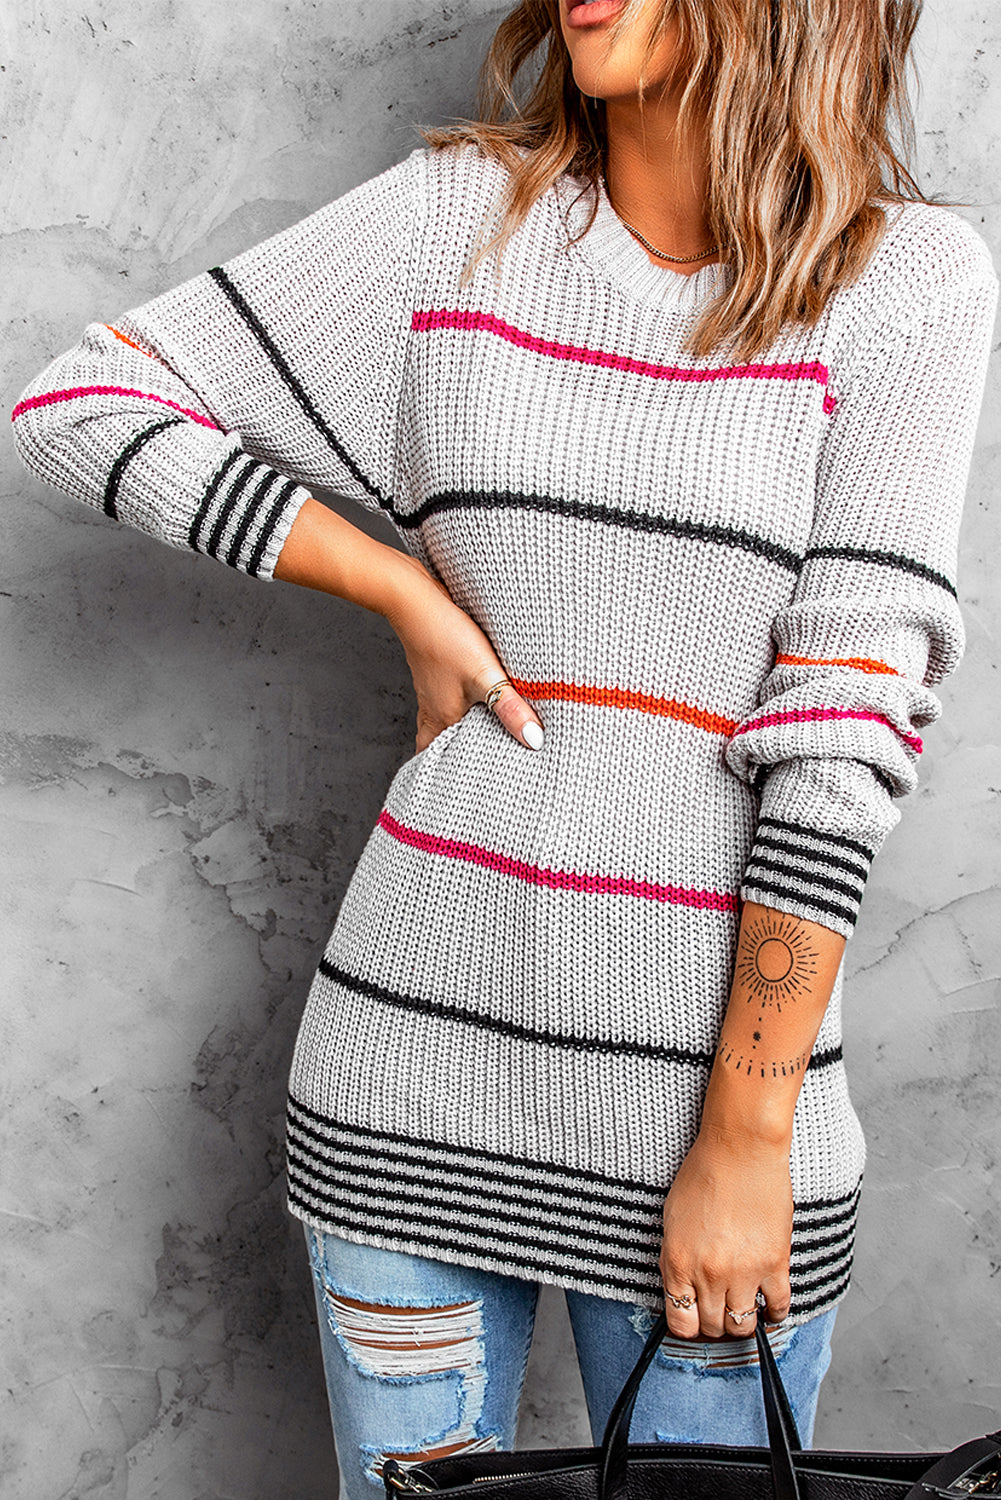 Gray Ribbed Knit Striped Sweater